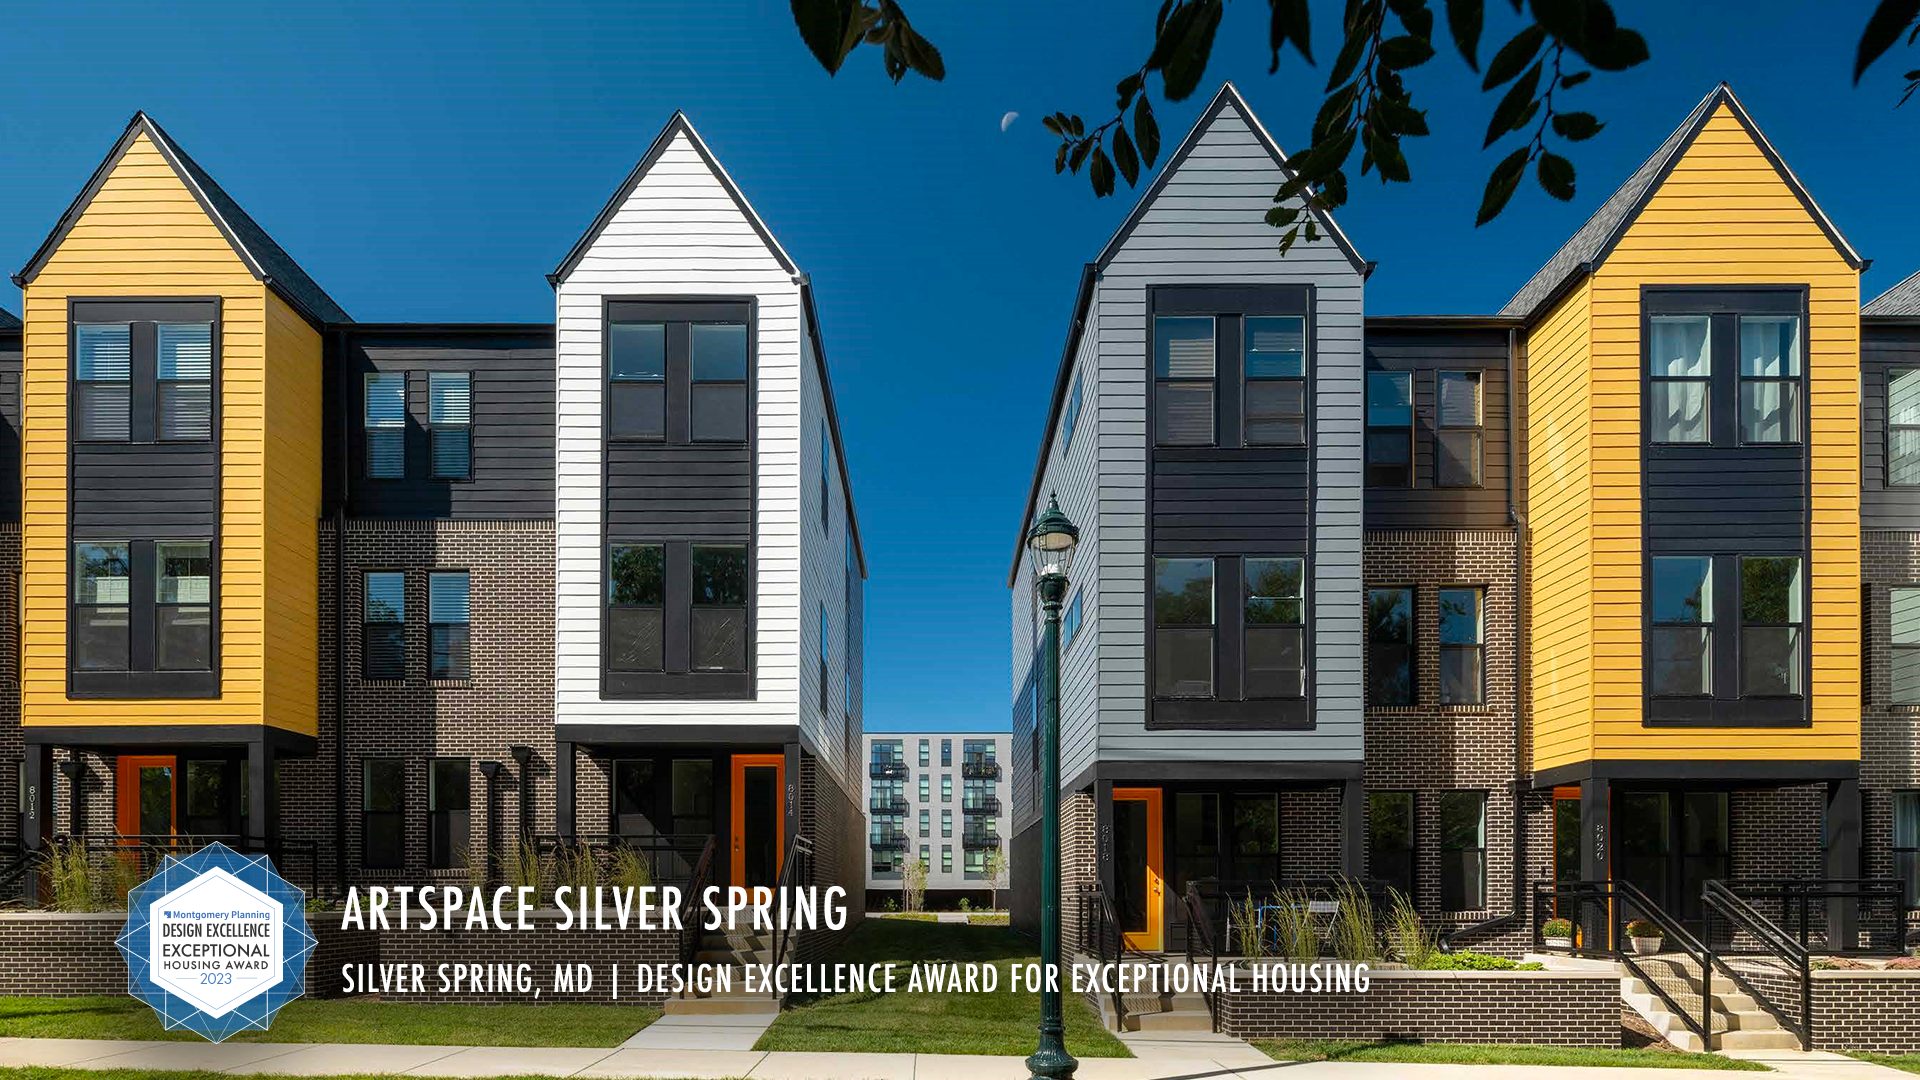 Artspace Silver Spring. four gray brick town homes each with yellow, white of gray siding on portion of structure